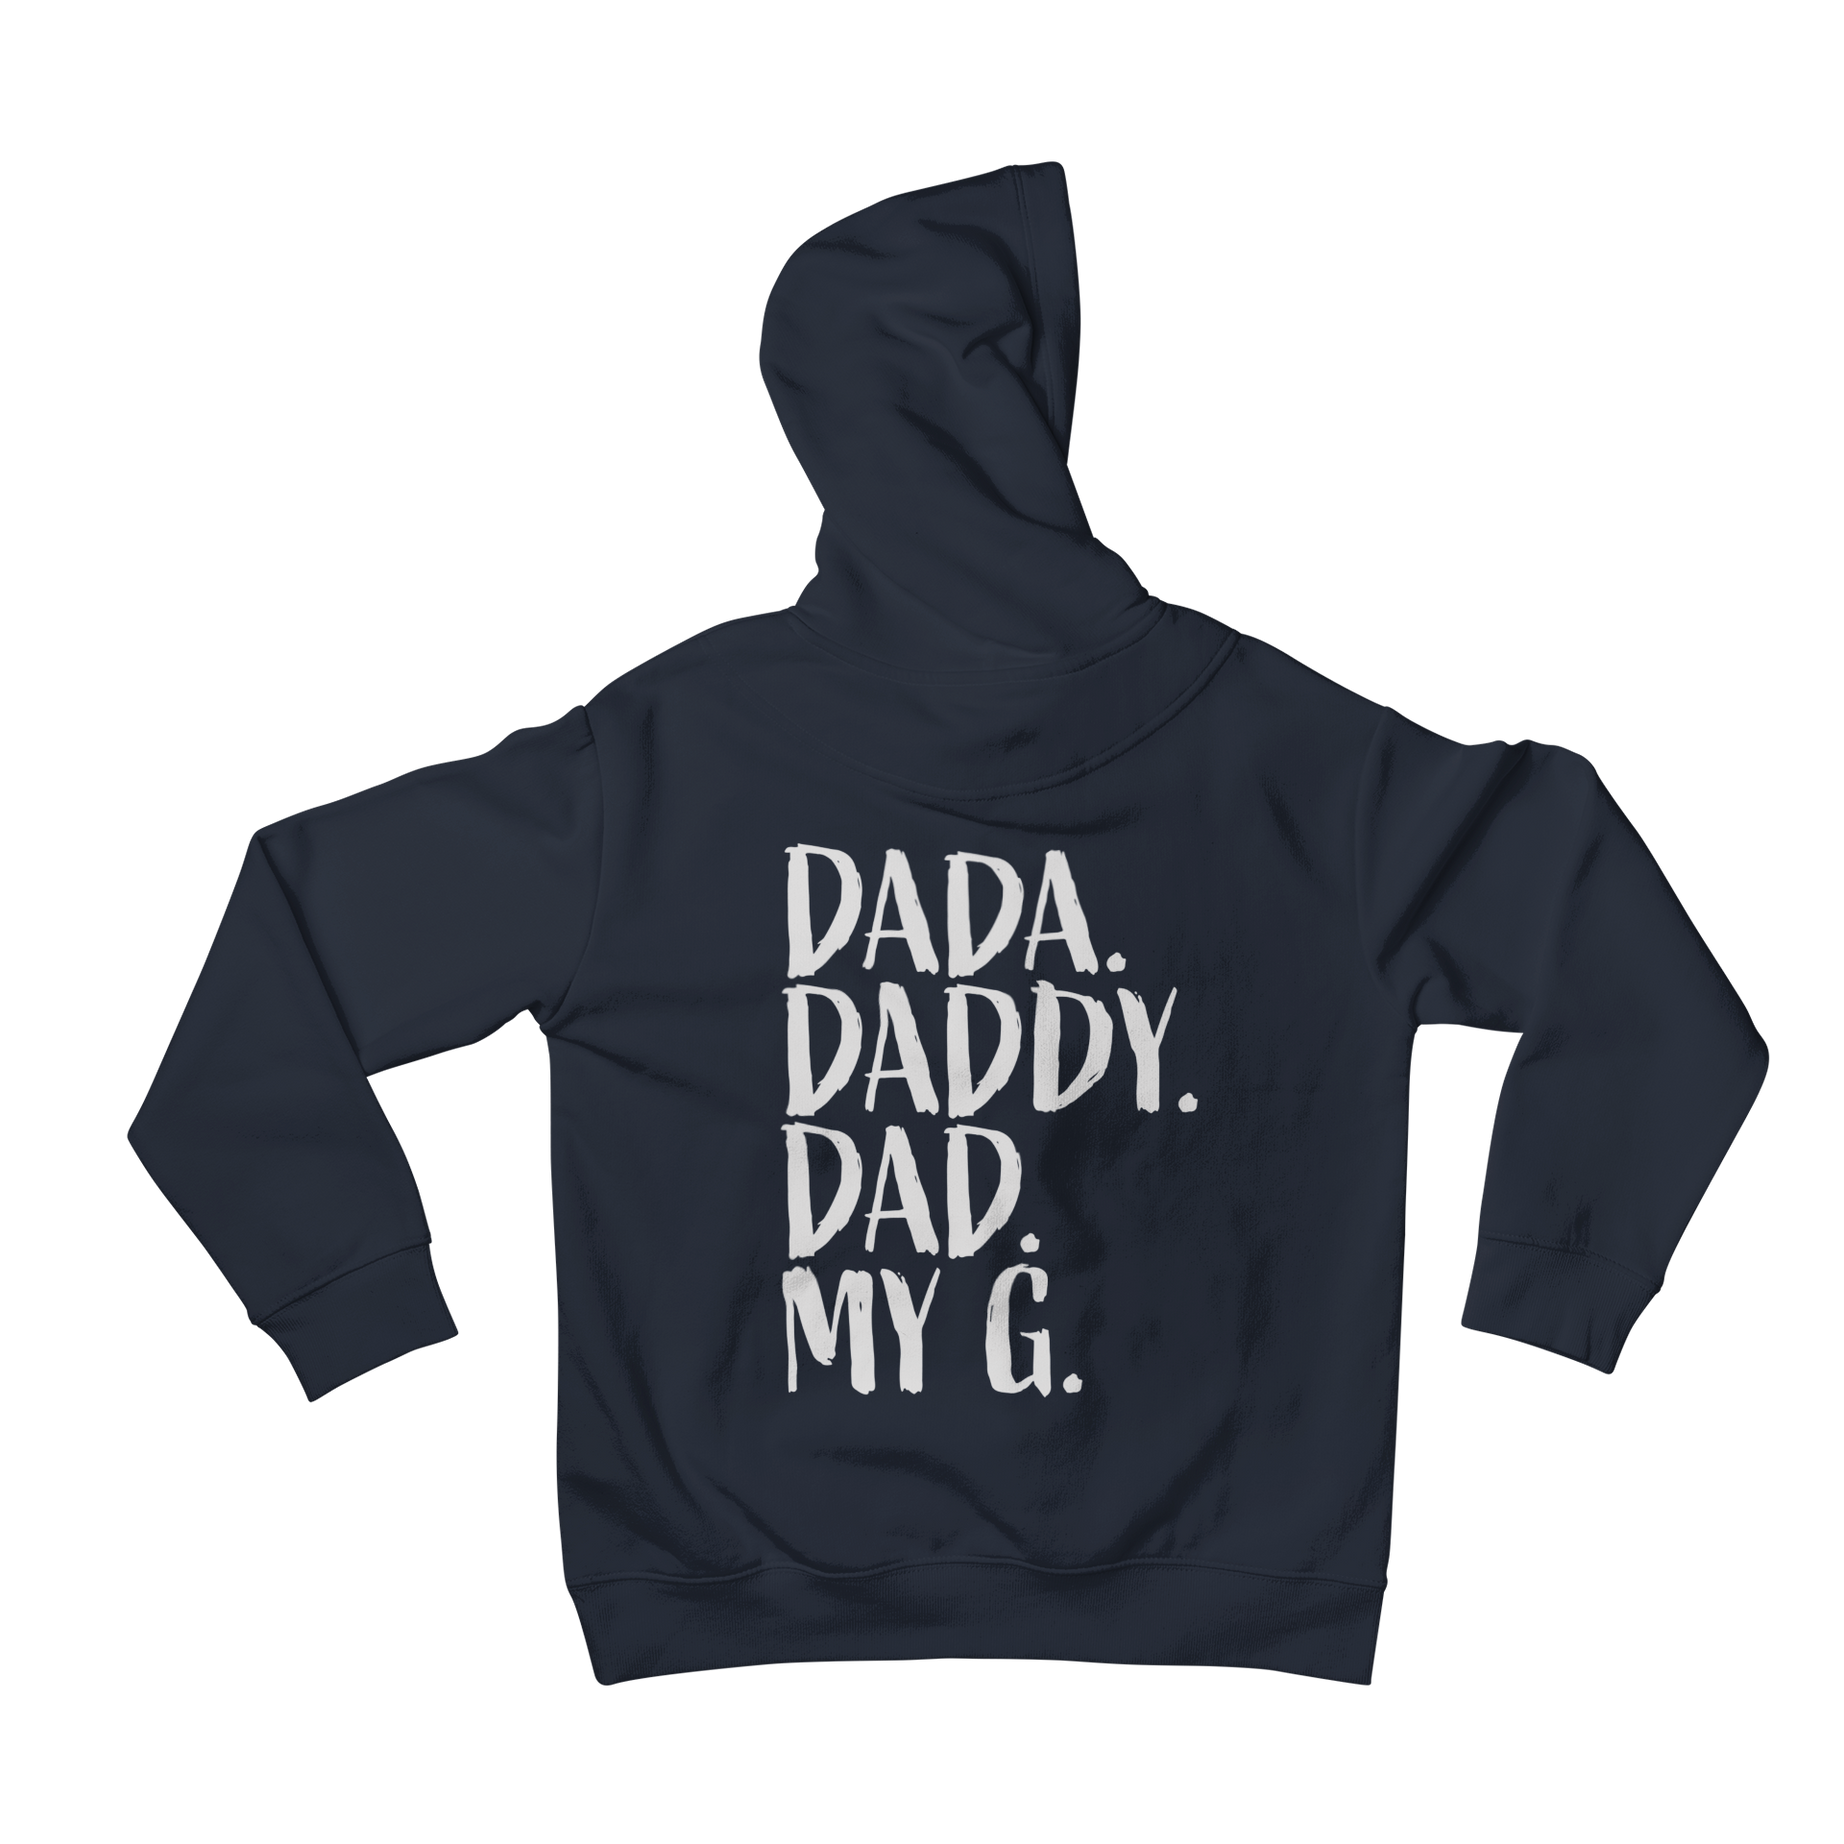 Discover the ultimate Dad-inspired fashion with Teevolution! Our Dada Daddy Dad My G Back print hoodie is a must-have for stylish dads everywhere. Embrace your inner dad and rock this trendy hoodie that combines comfort and humour. Get yours now and join the teevolution!